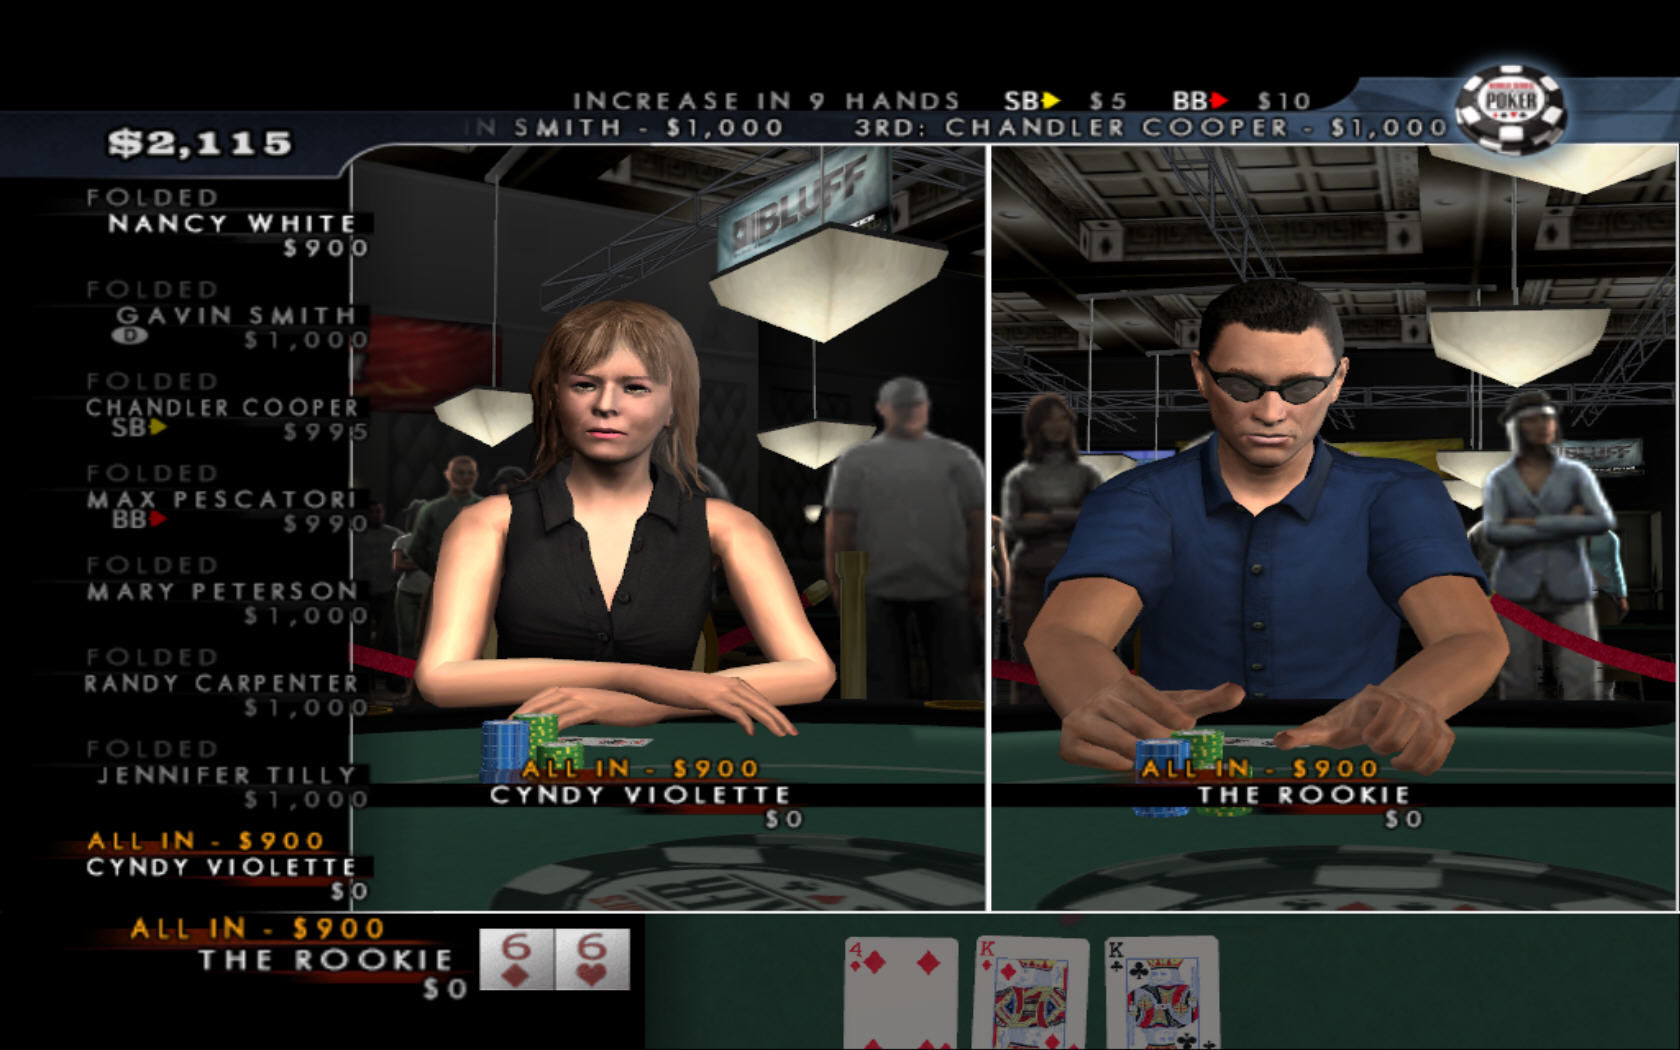 World Series of Poker 2008: Battle for the Bracelets - PlayStation 2 (PS2) Game